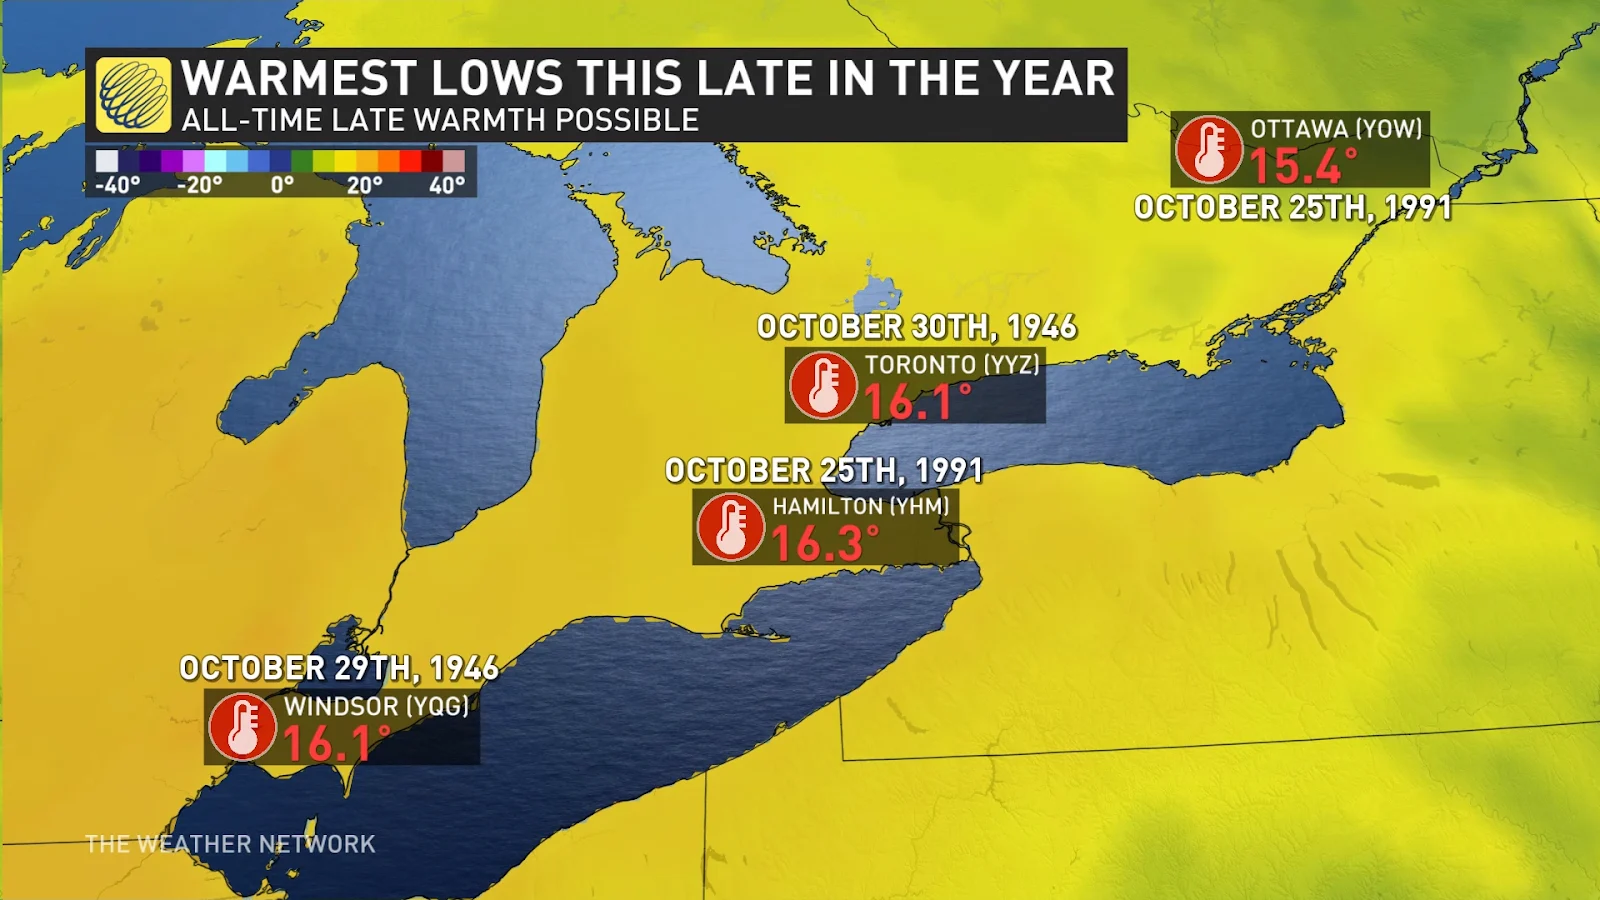 S ON Oct warmest lows records